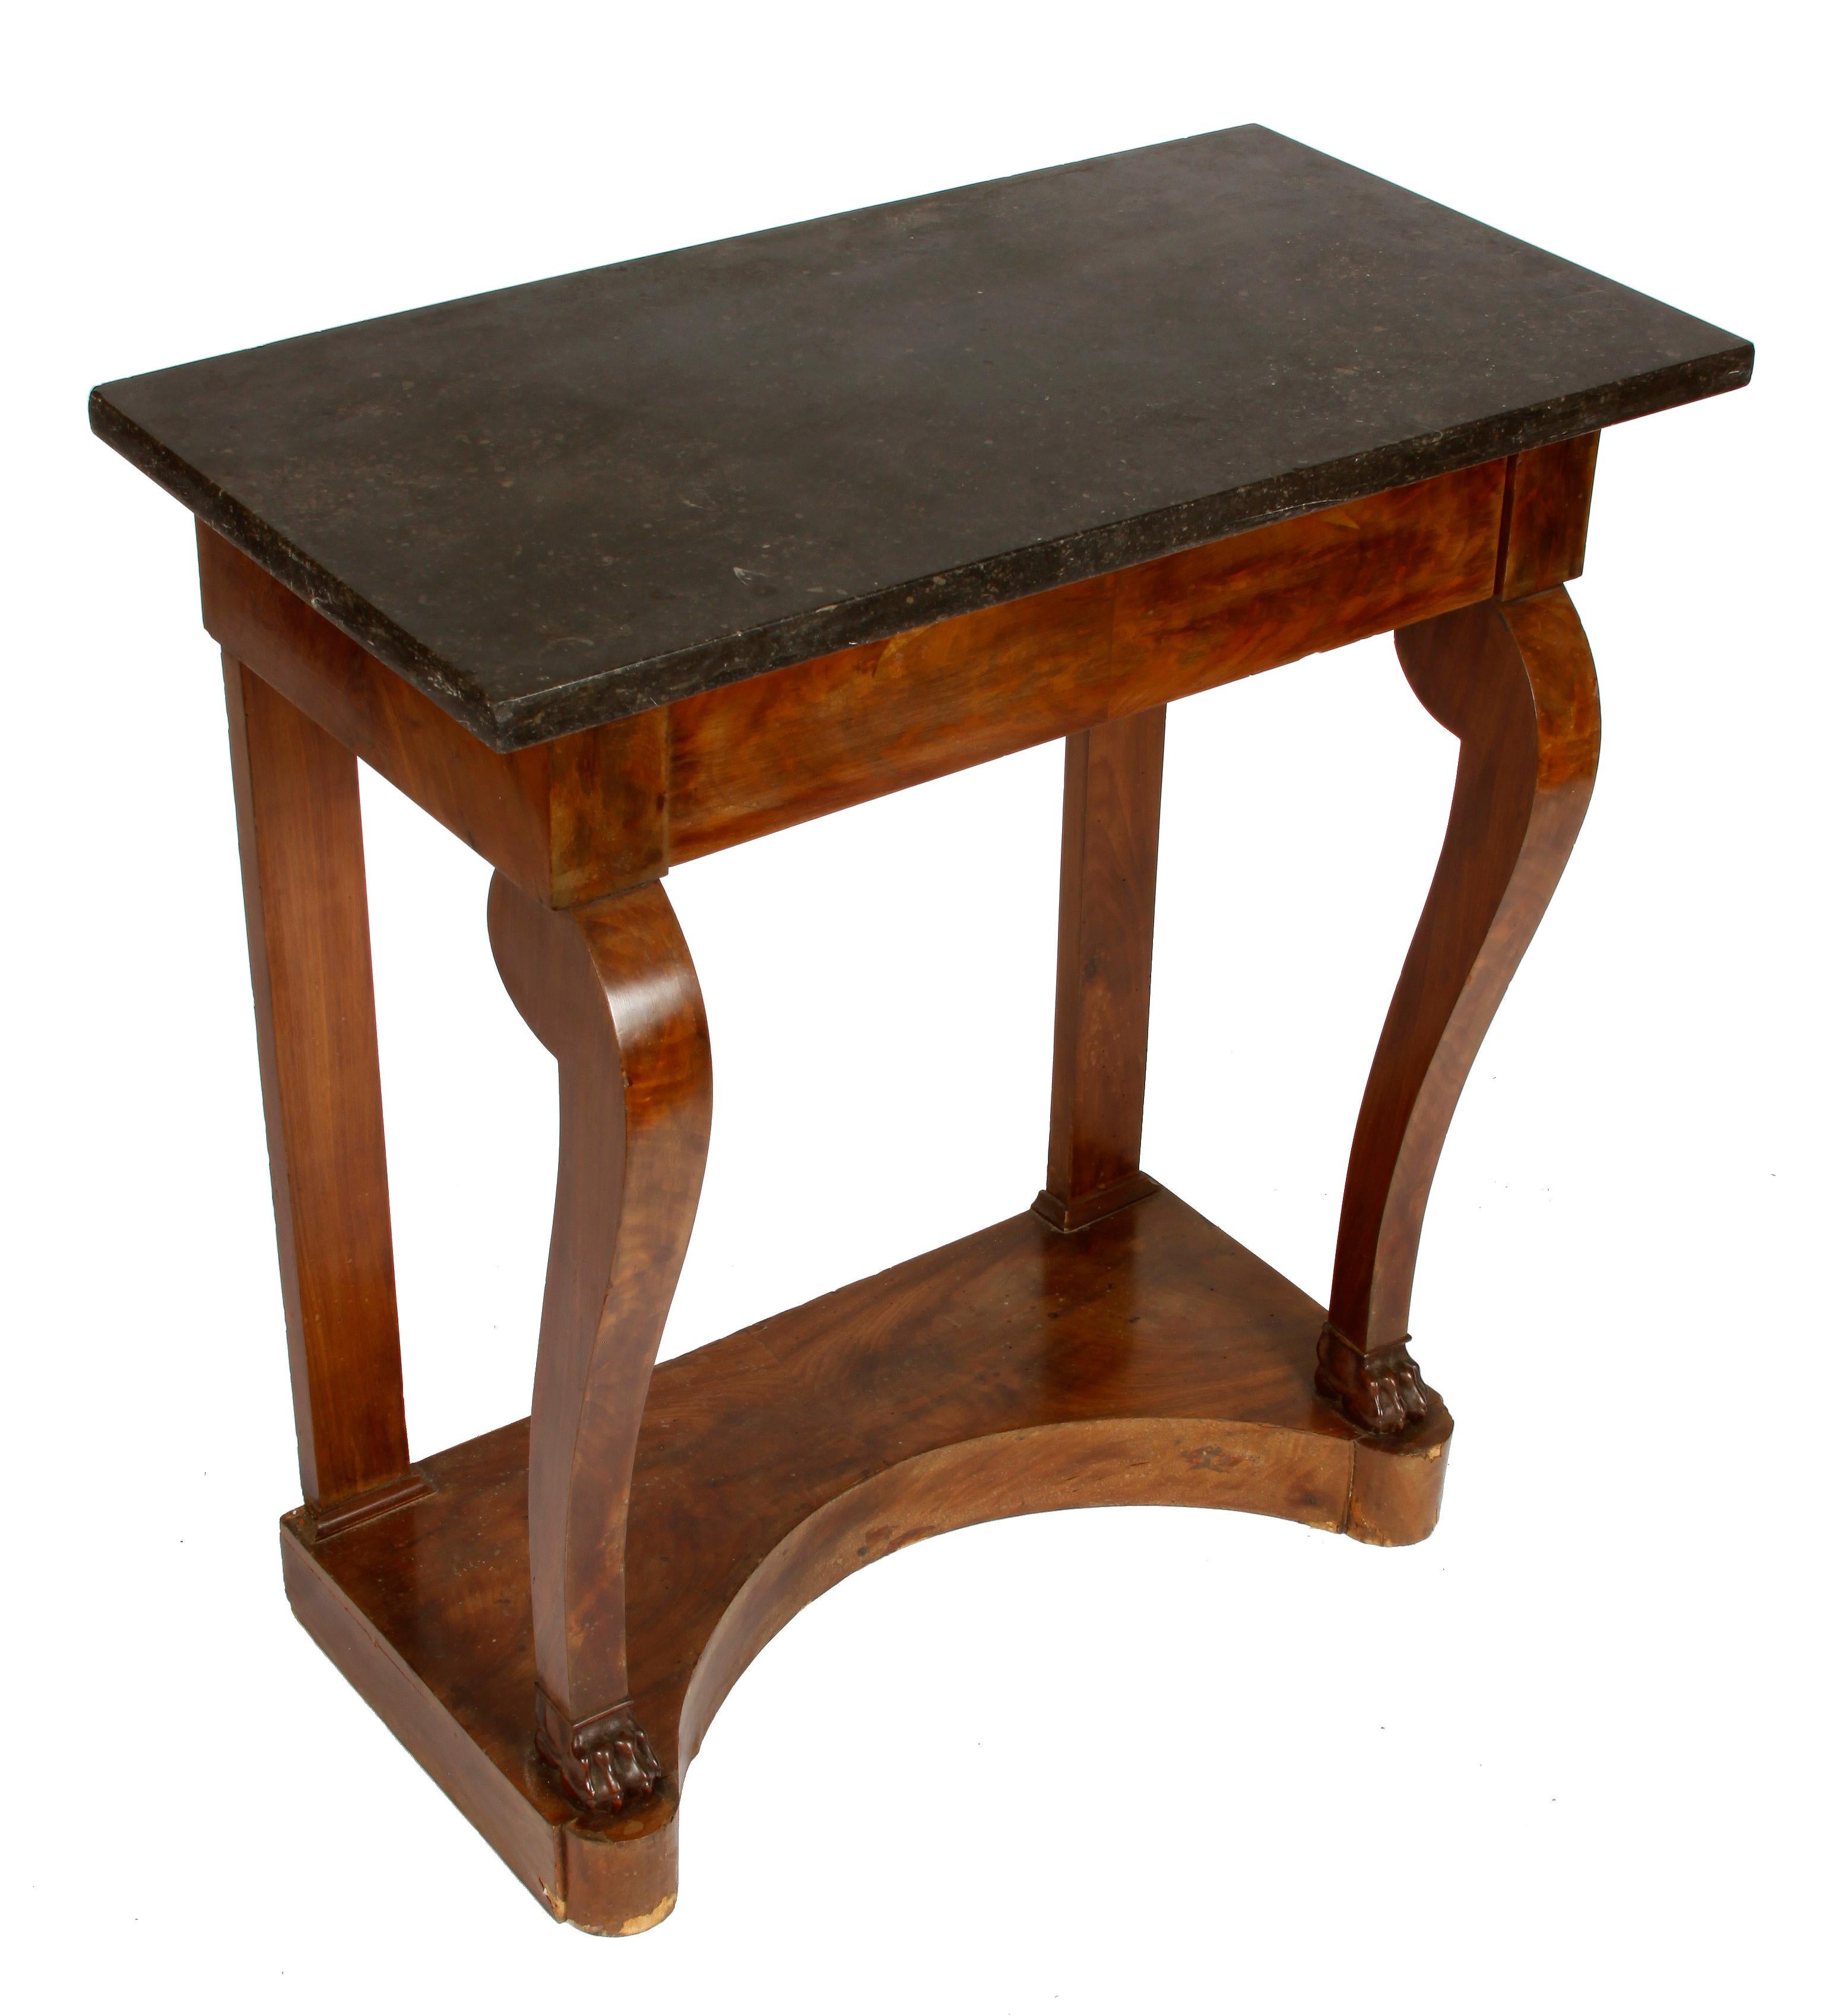 French Empire dark marble top walnut pier table with claw feet.